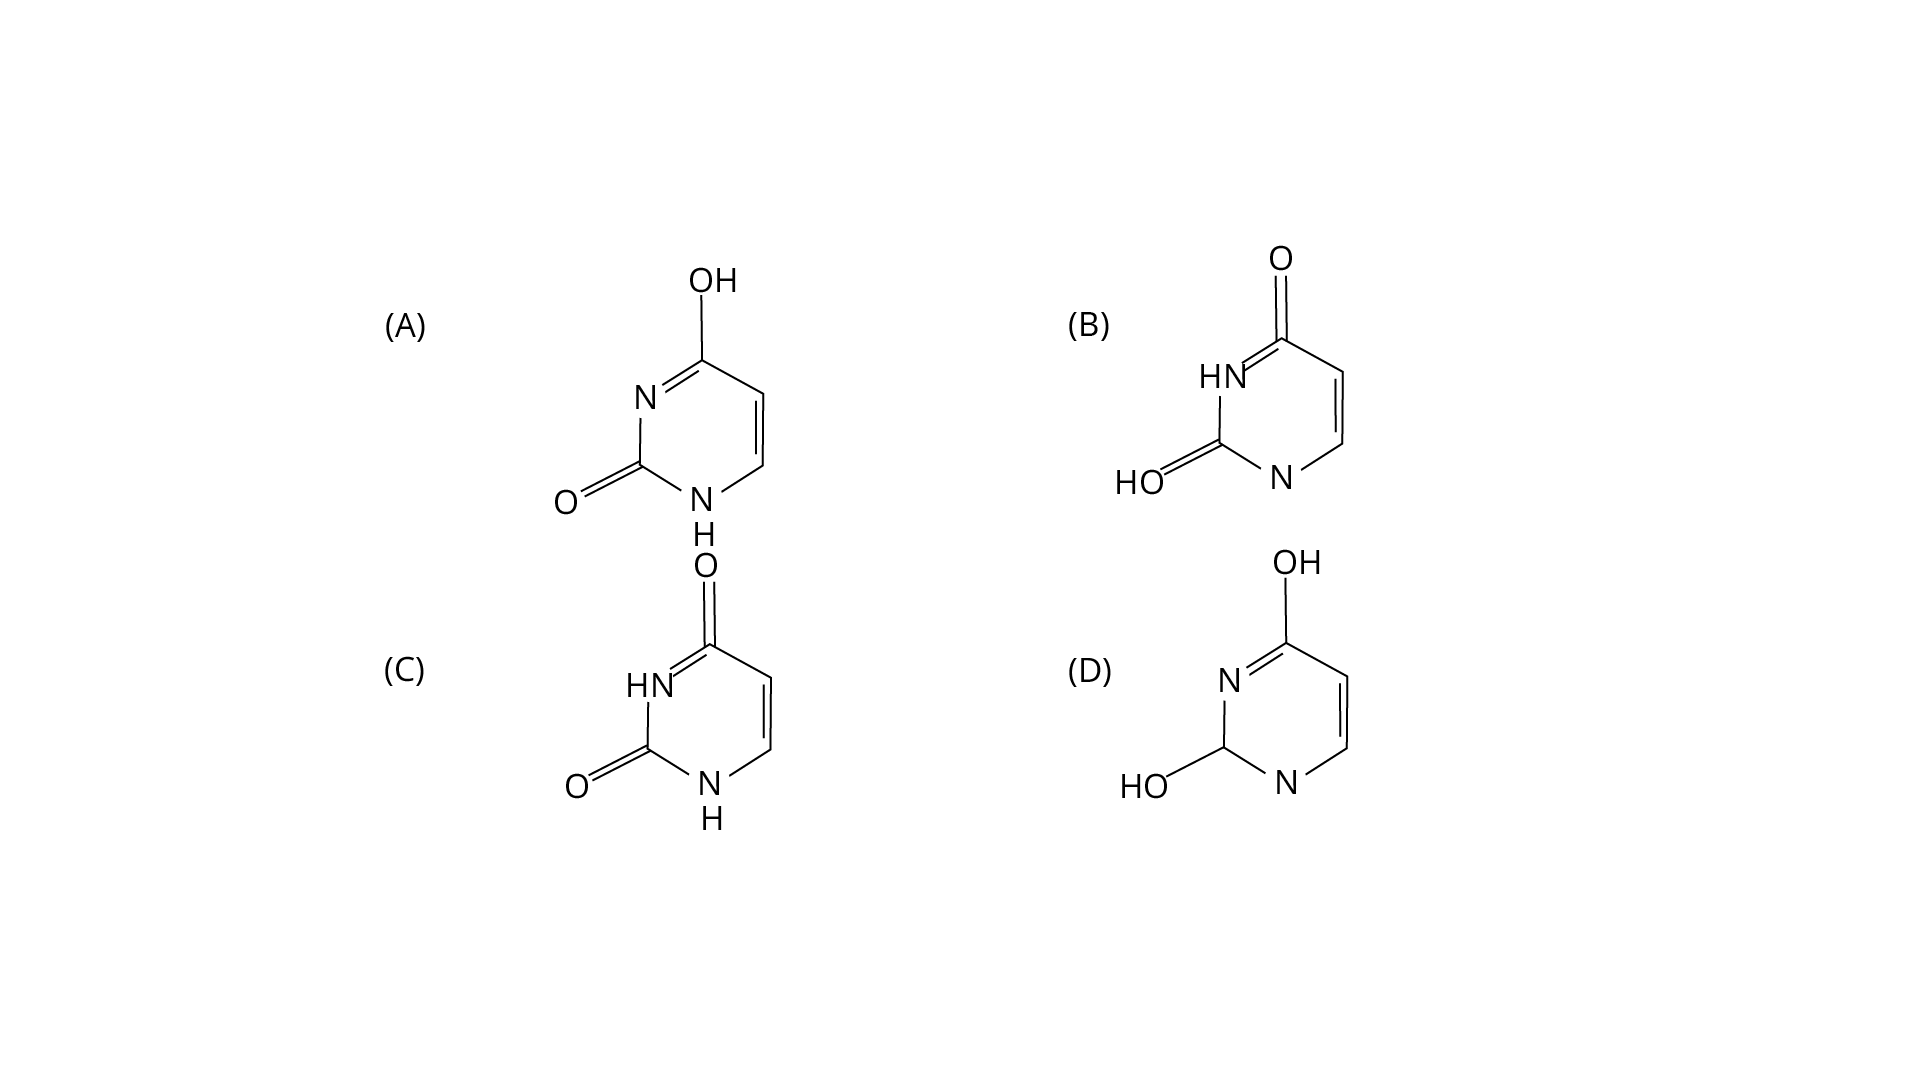 Isomeric forms of uracil